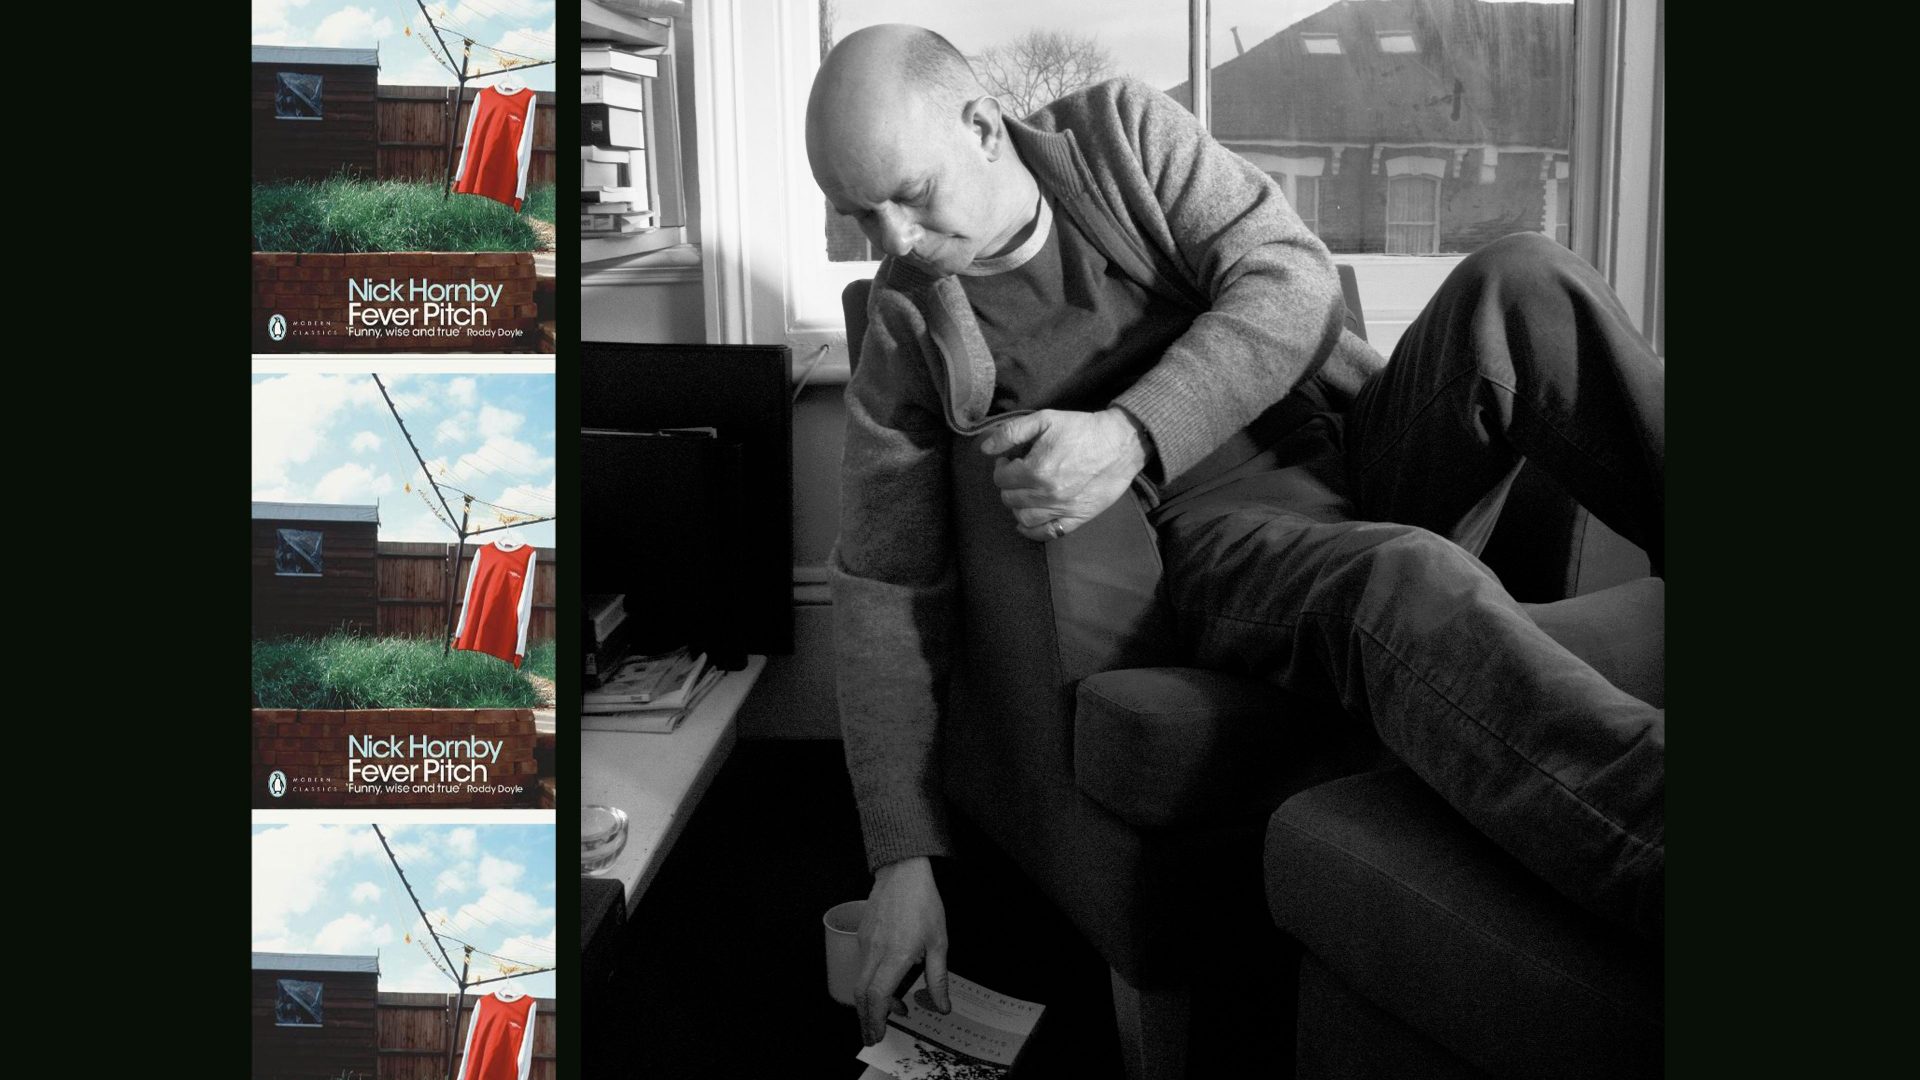 Nick Hornby, Arsenal fan and author of Fever Pitch, in 2004. Photo: Cambridge Jones/Getty